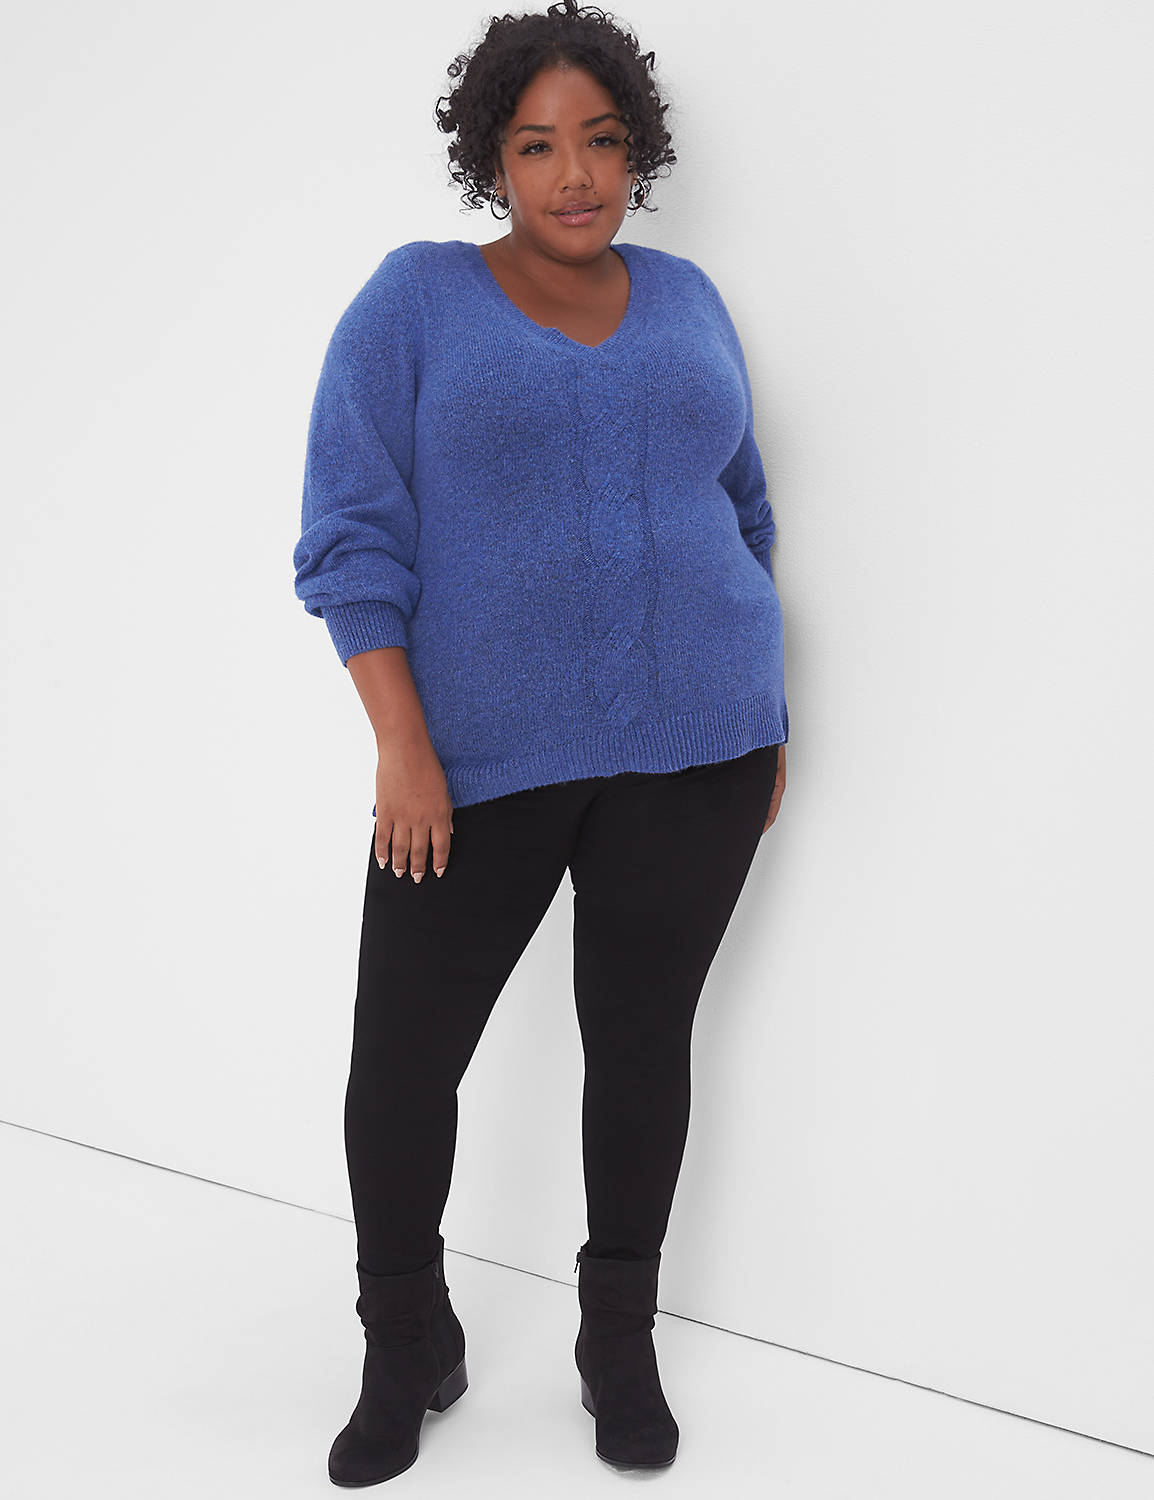 Lane Bryant Classic Tunic Pullover Cable Knit Sweater 10/12 Dazzling Blue